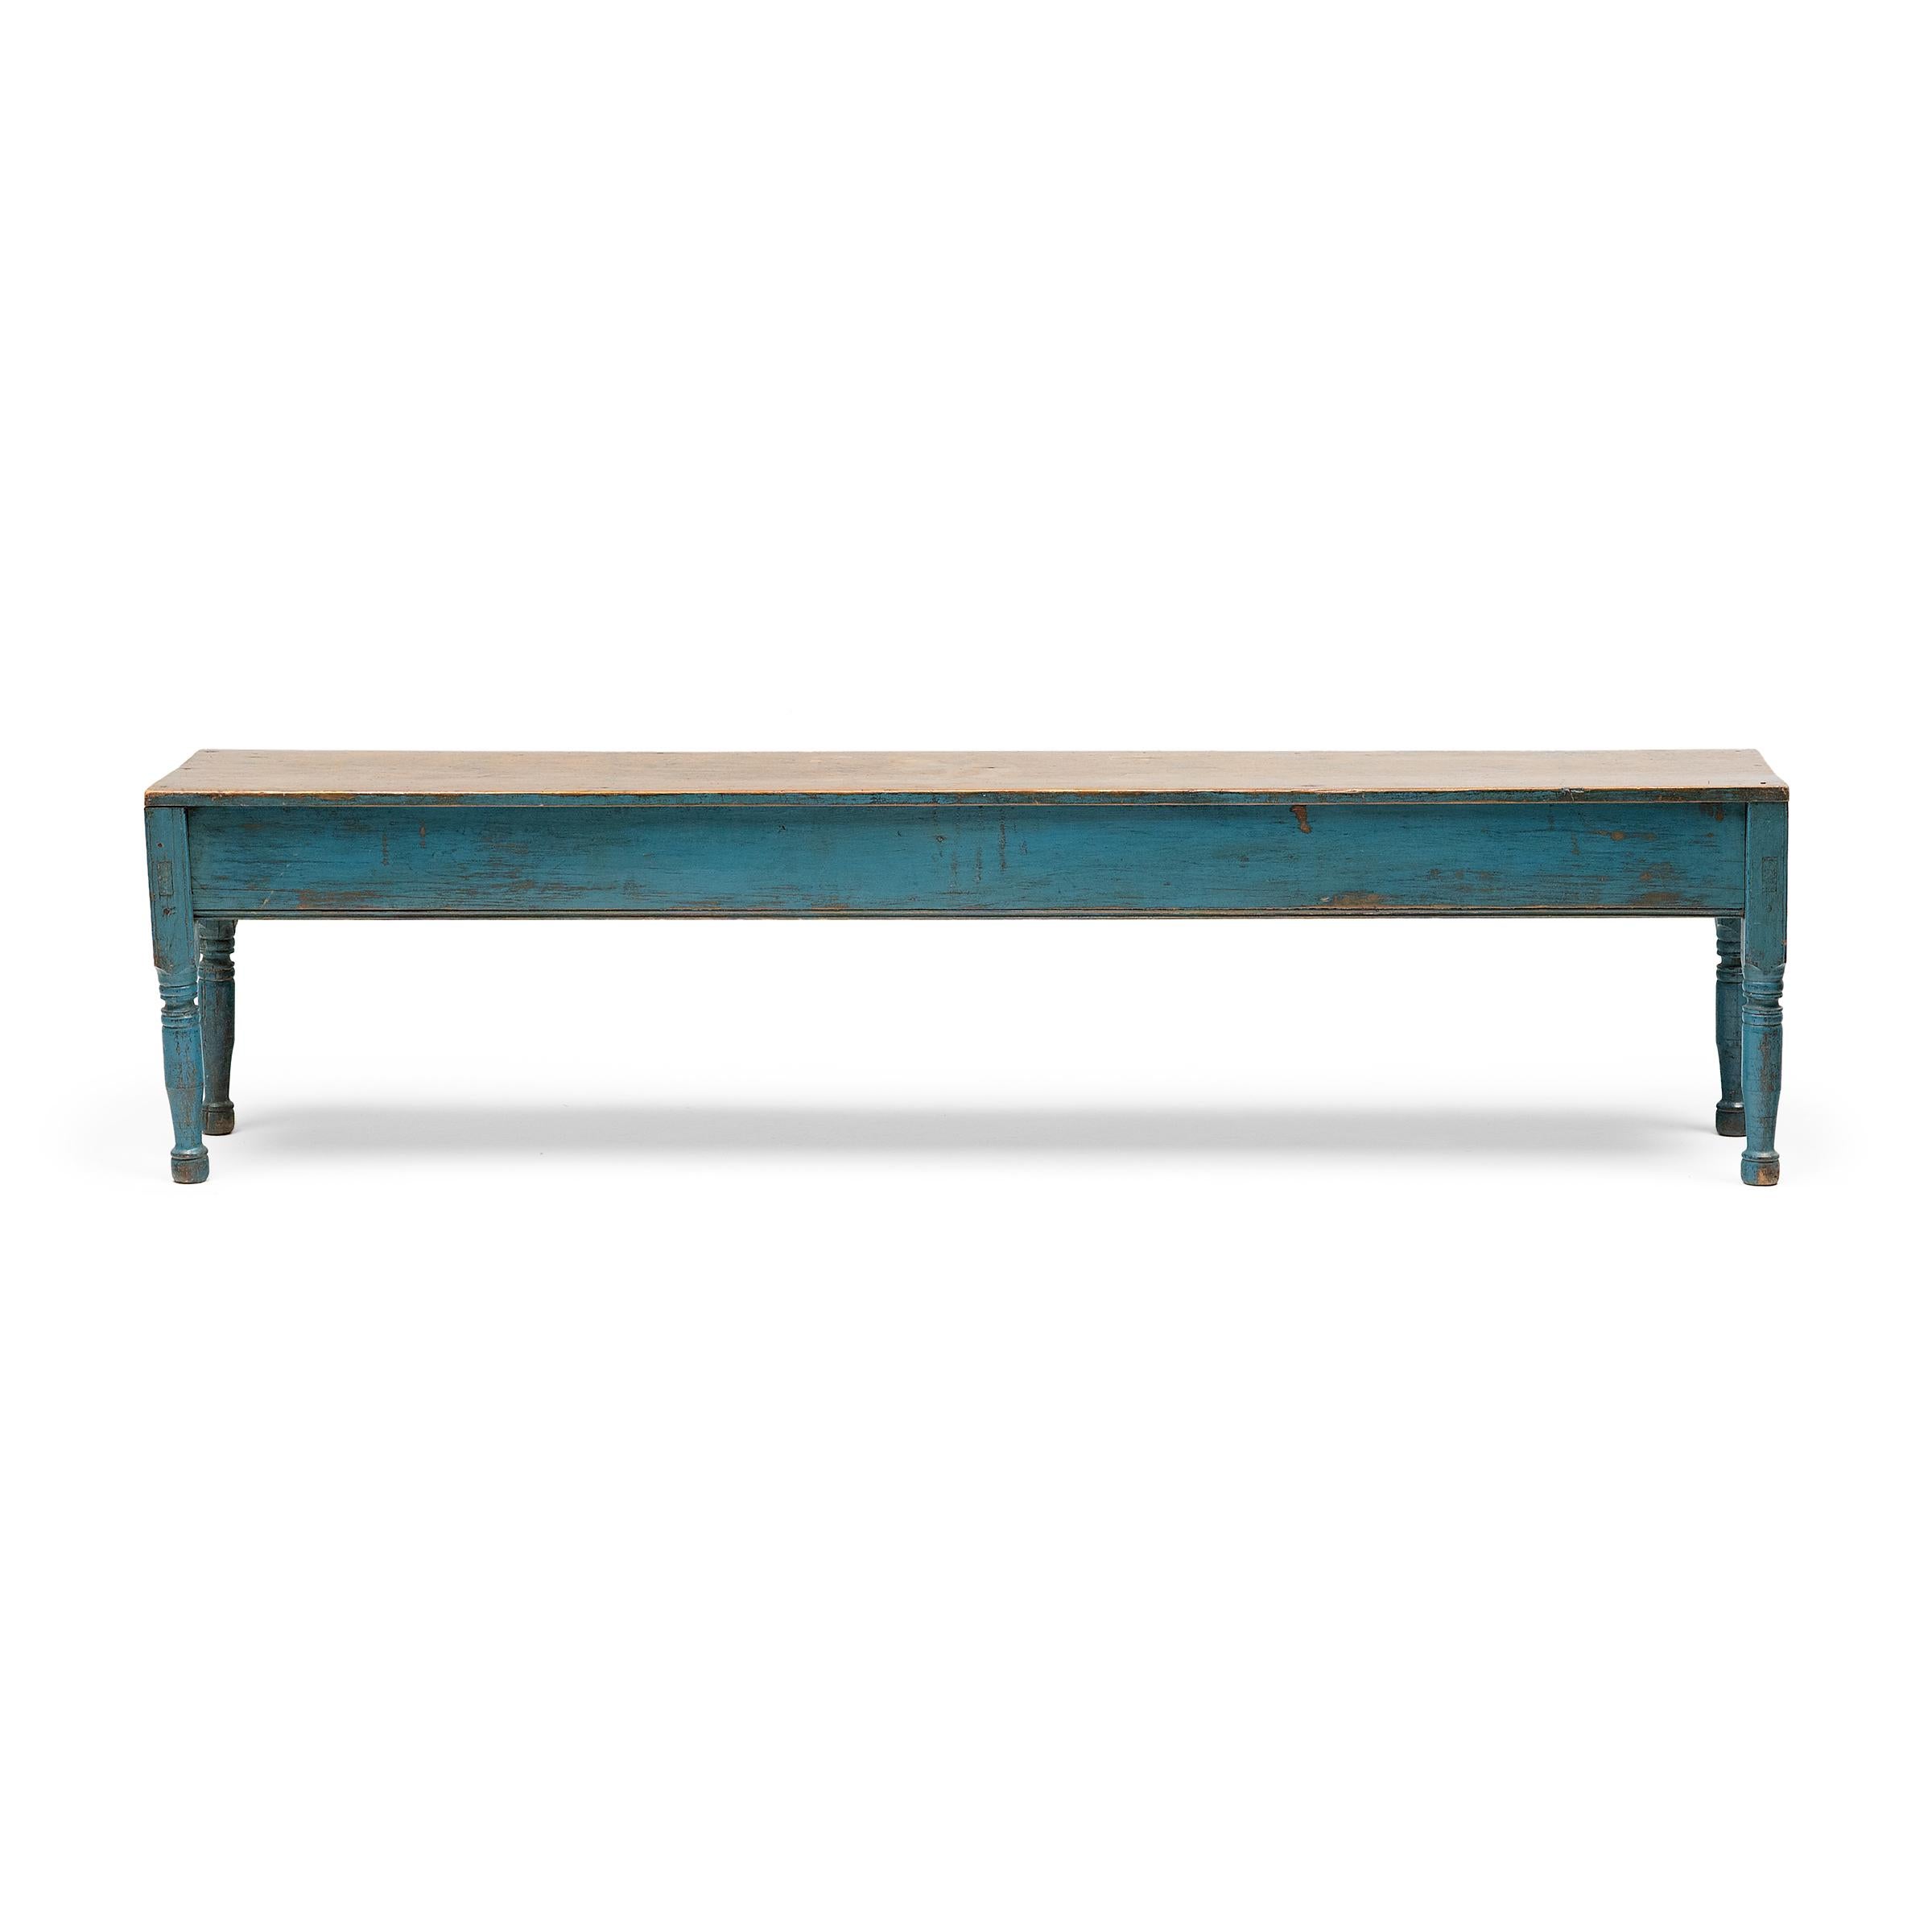 20th Century Blue Painted Farmhouse Bench, c. 1900 For Sale